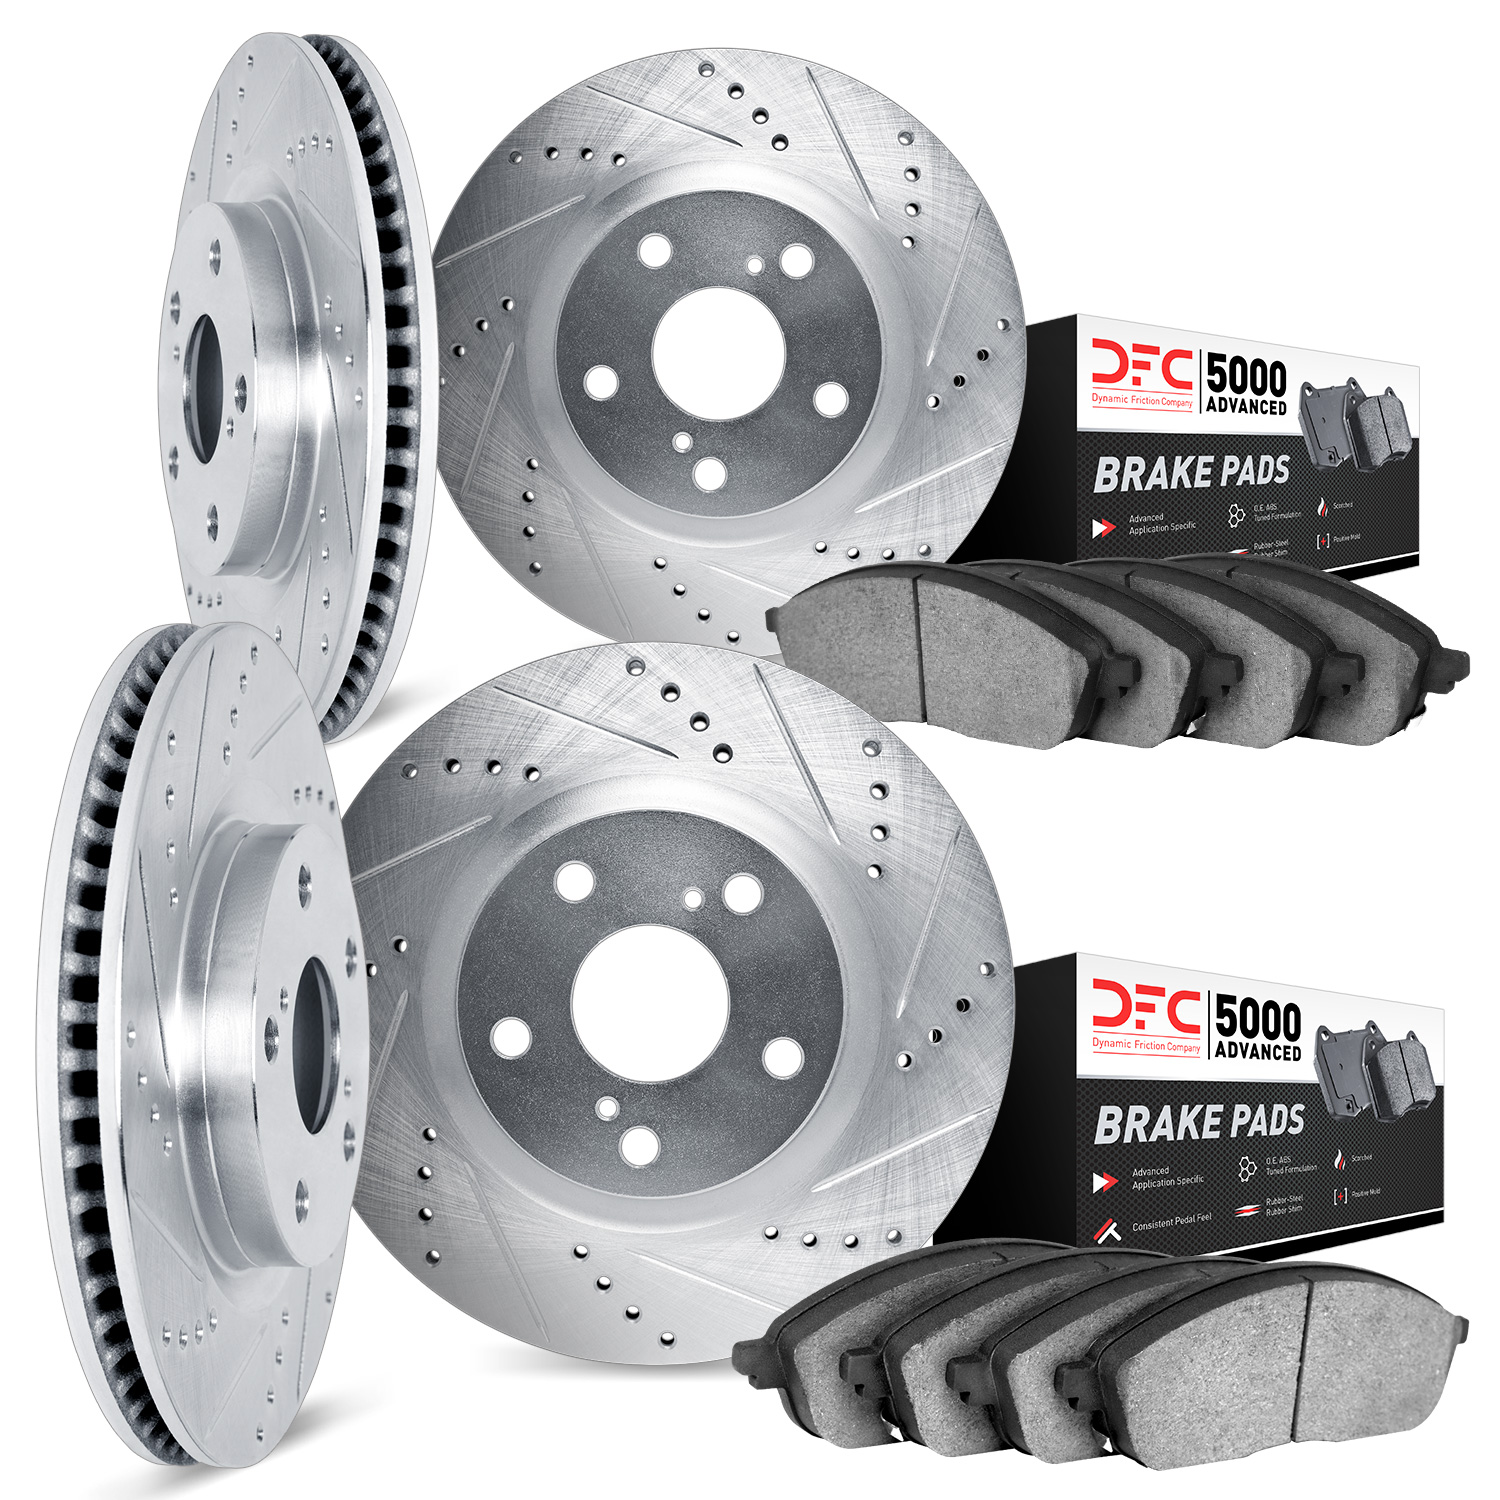 7504-20010 Drilled/Slotted Brake Rotors w/5000 Advanced Brake Pads Kit [Silver], 2008-2009 Jaguar, Position: Front and Rear